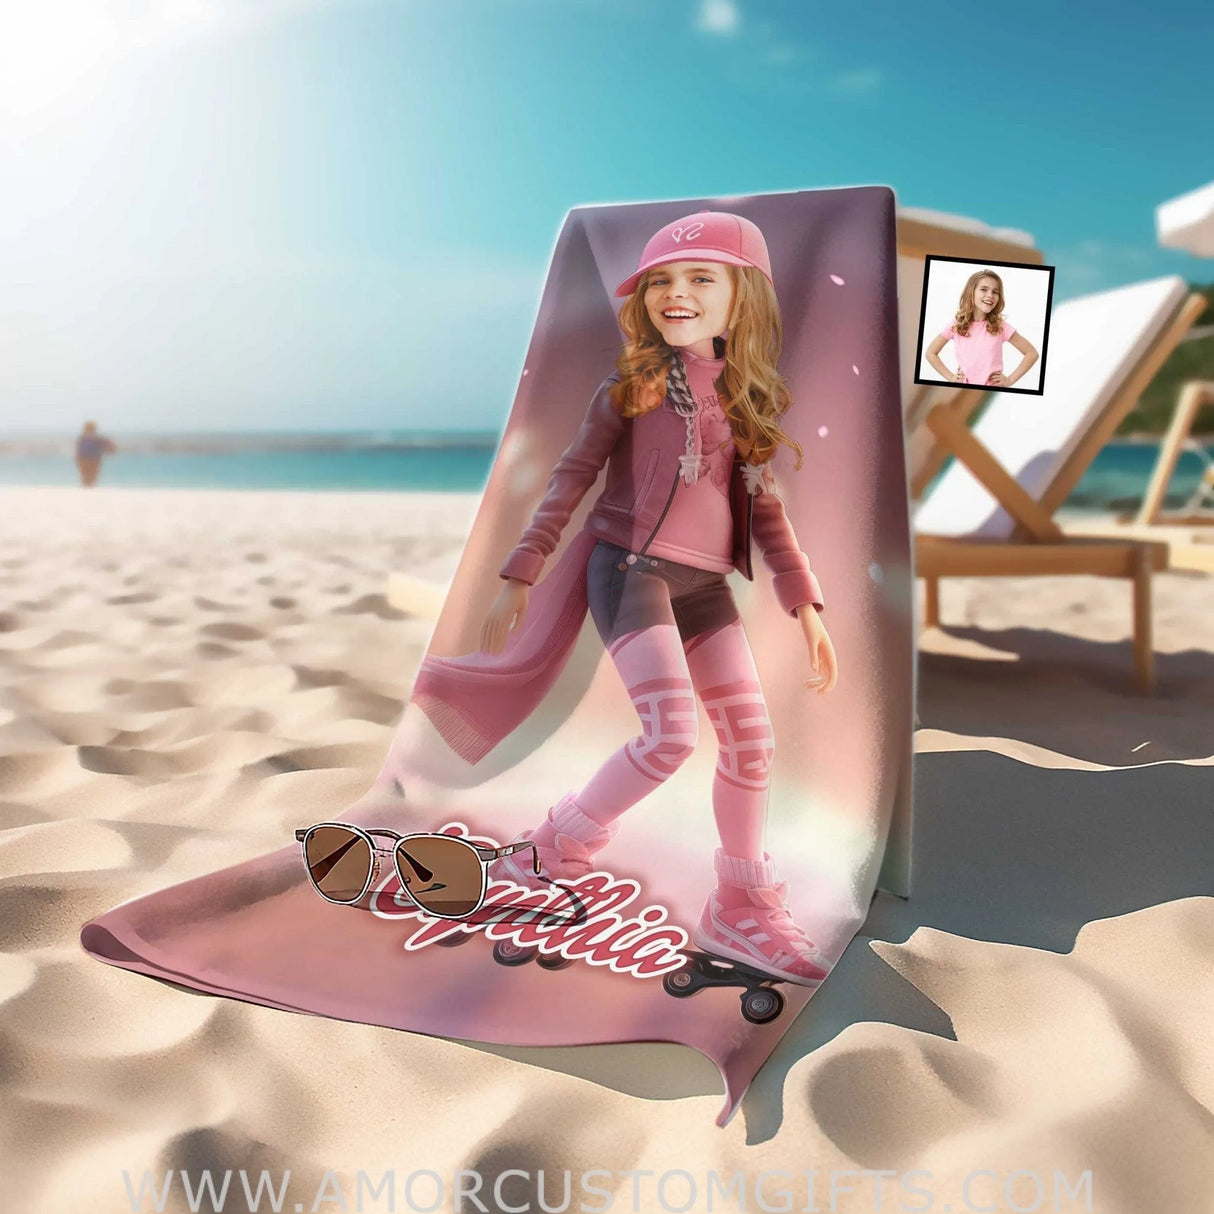 Towels Personalized Face & Name Summer Pink Fashion Doll Skating Girl Beach Towel